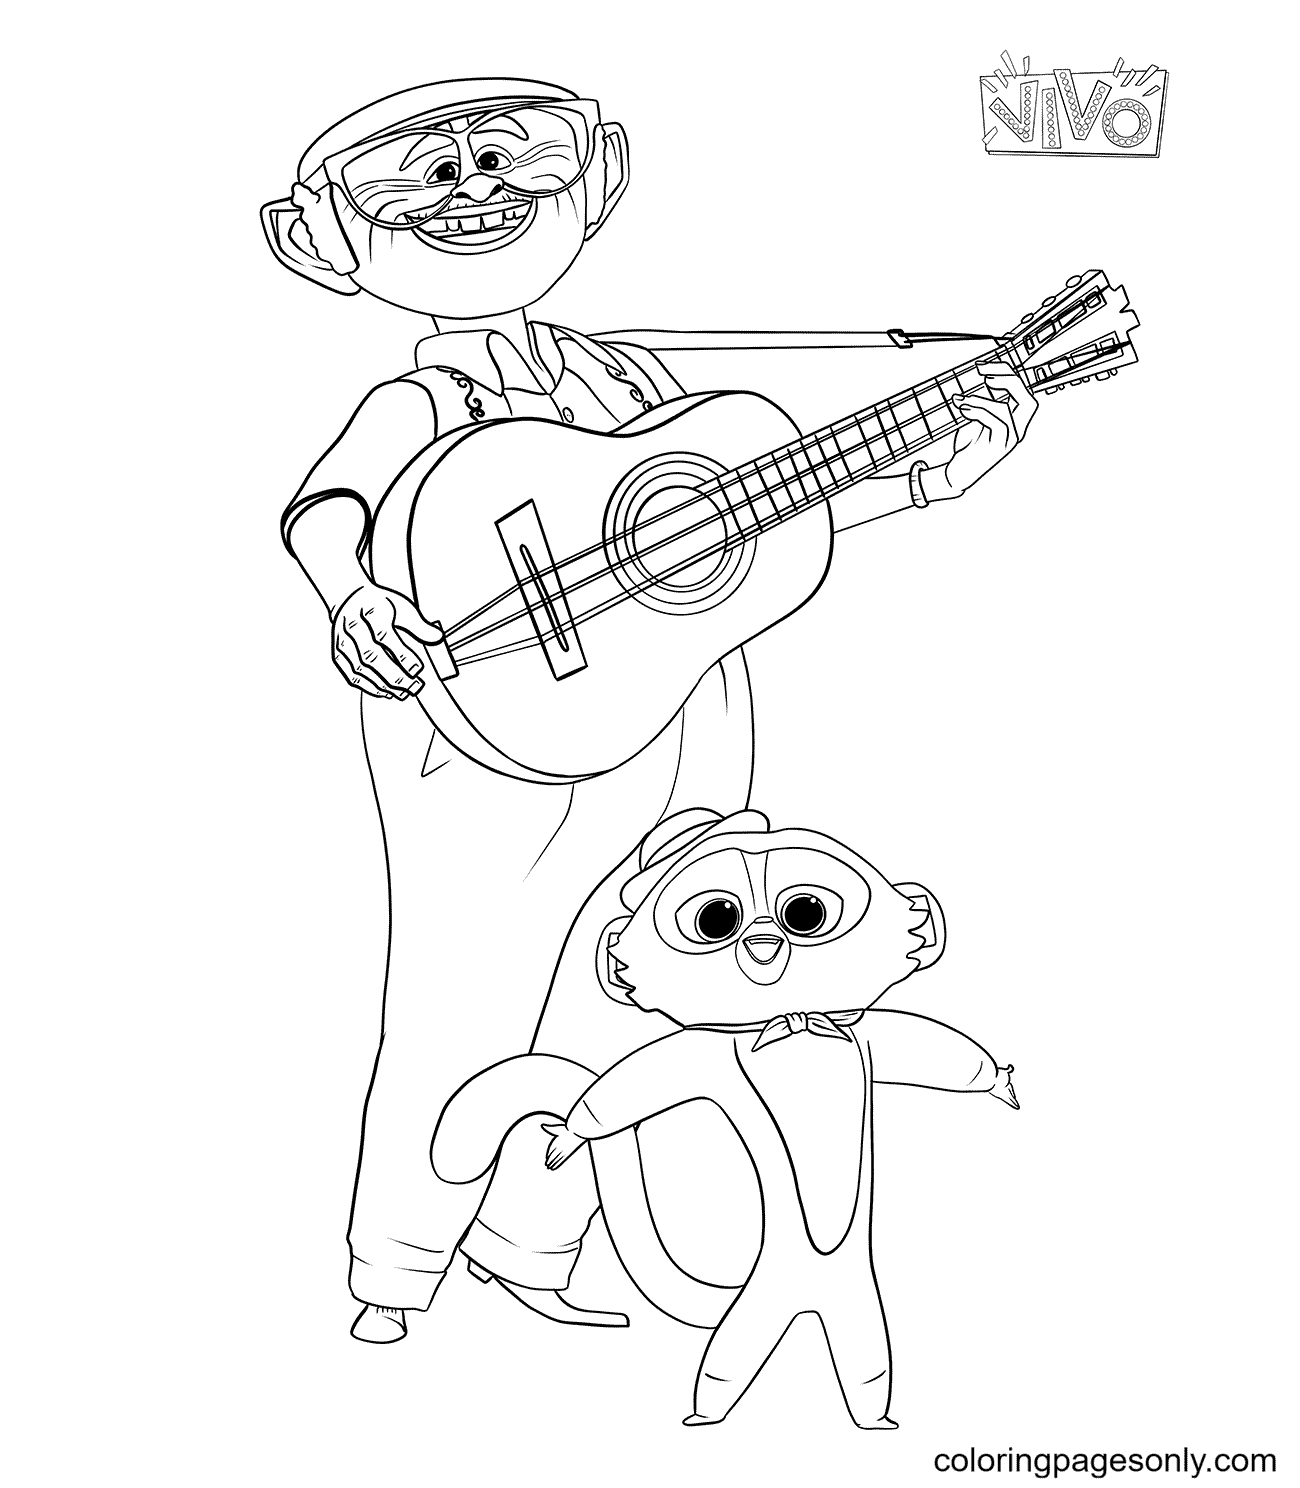 Andres and Vivo Coloring Page